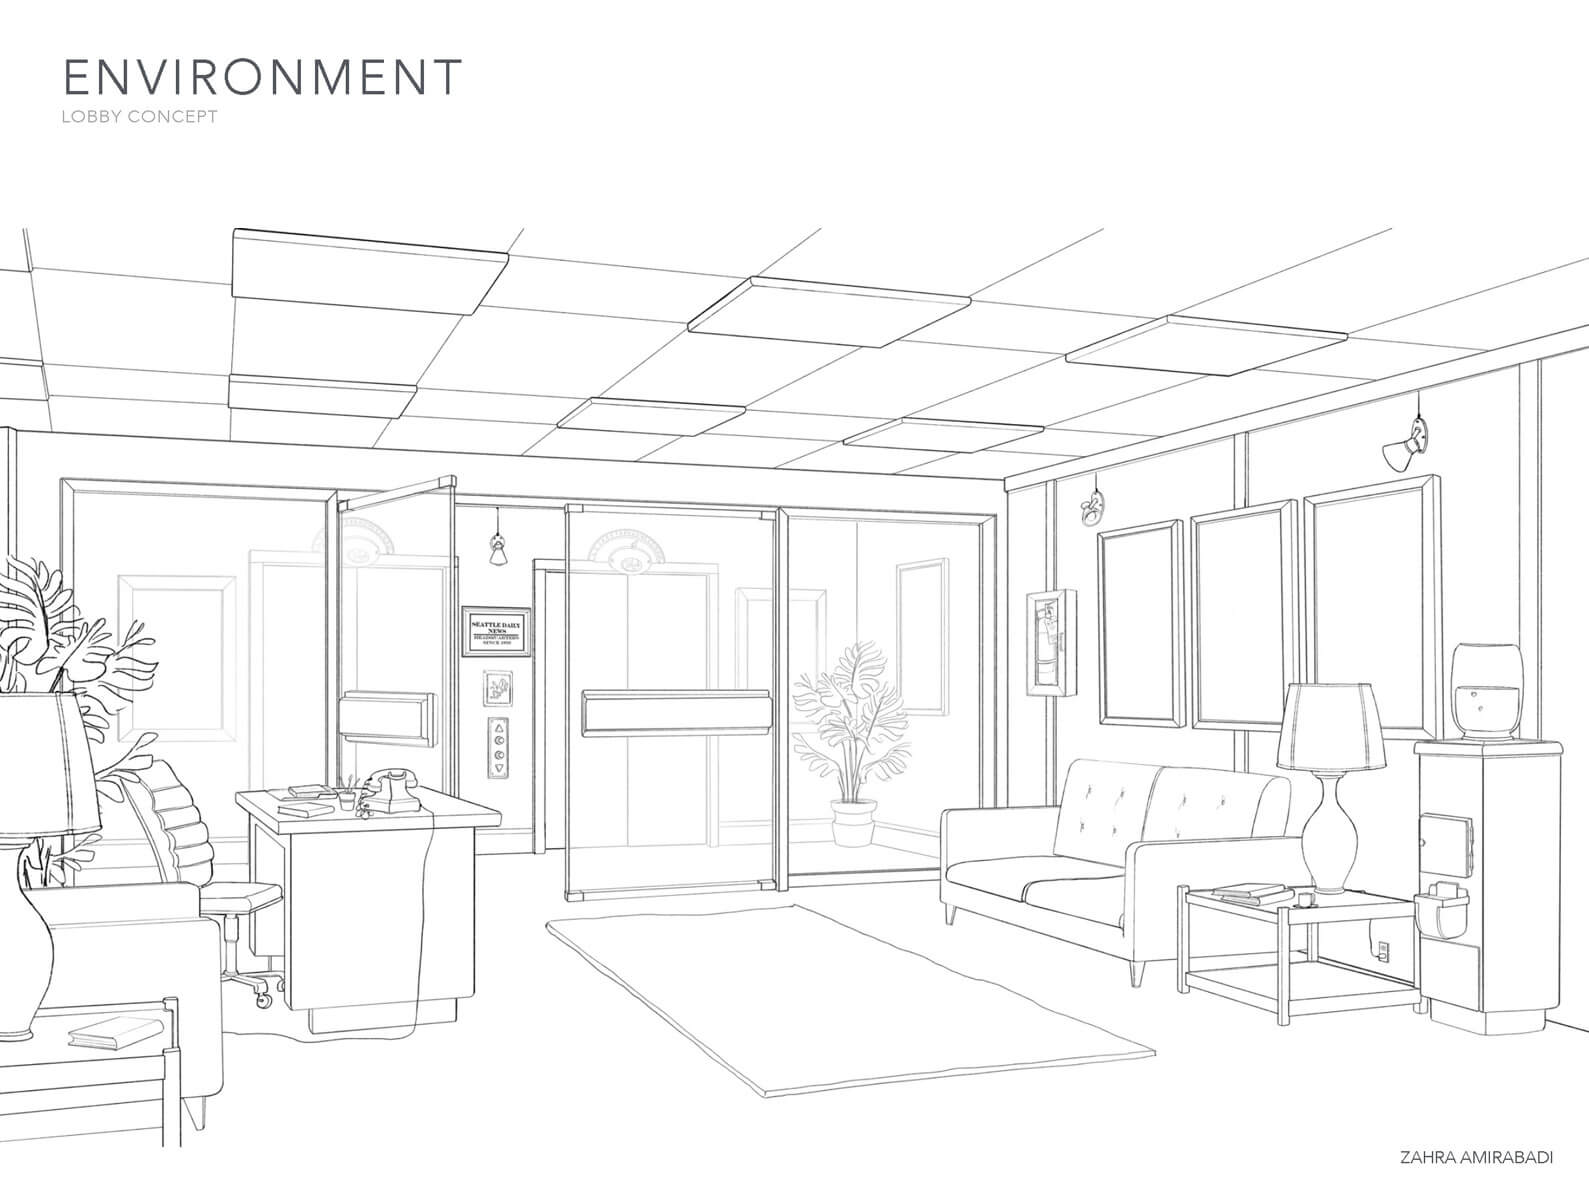 Black and white concept sketch of the Lobby environment from the short film Orientation Center for the Unseen.